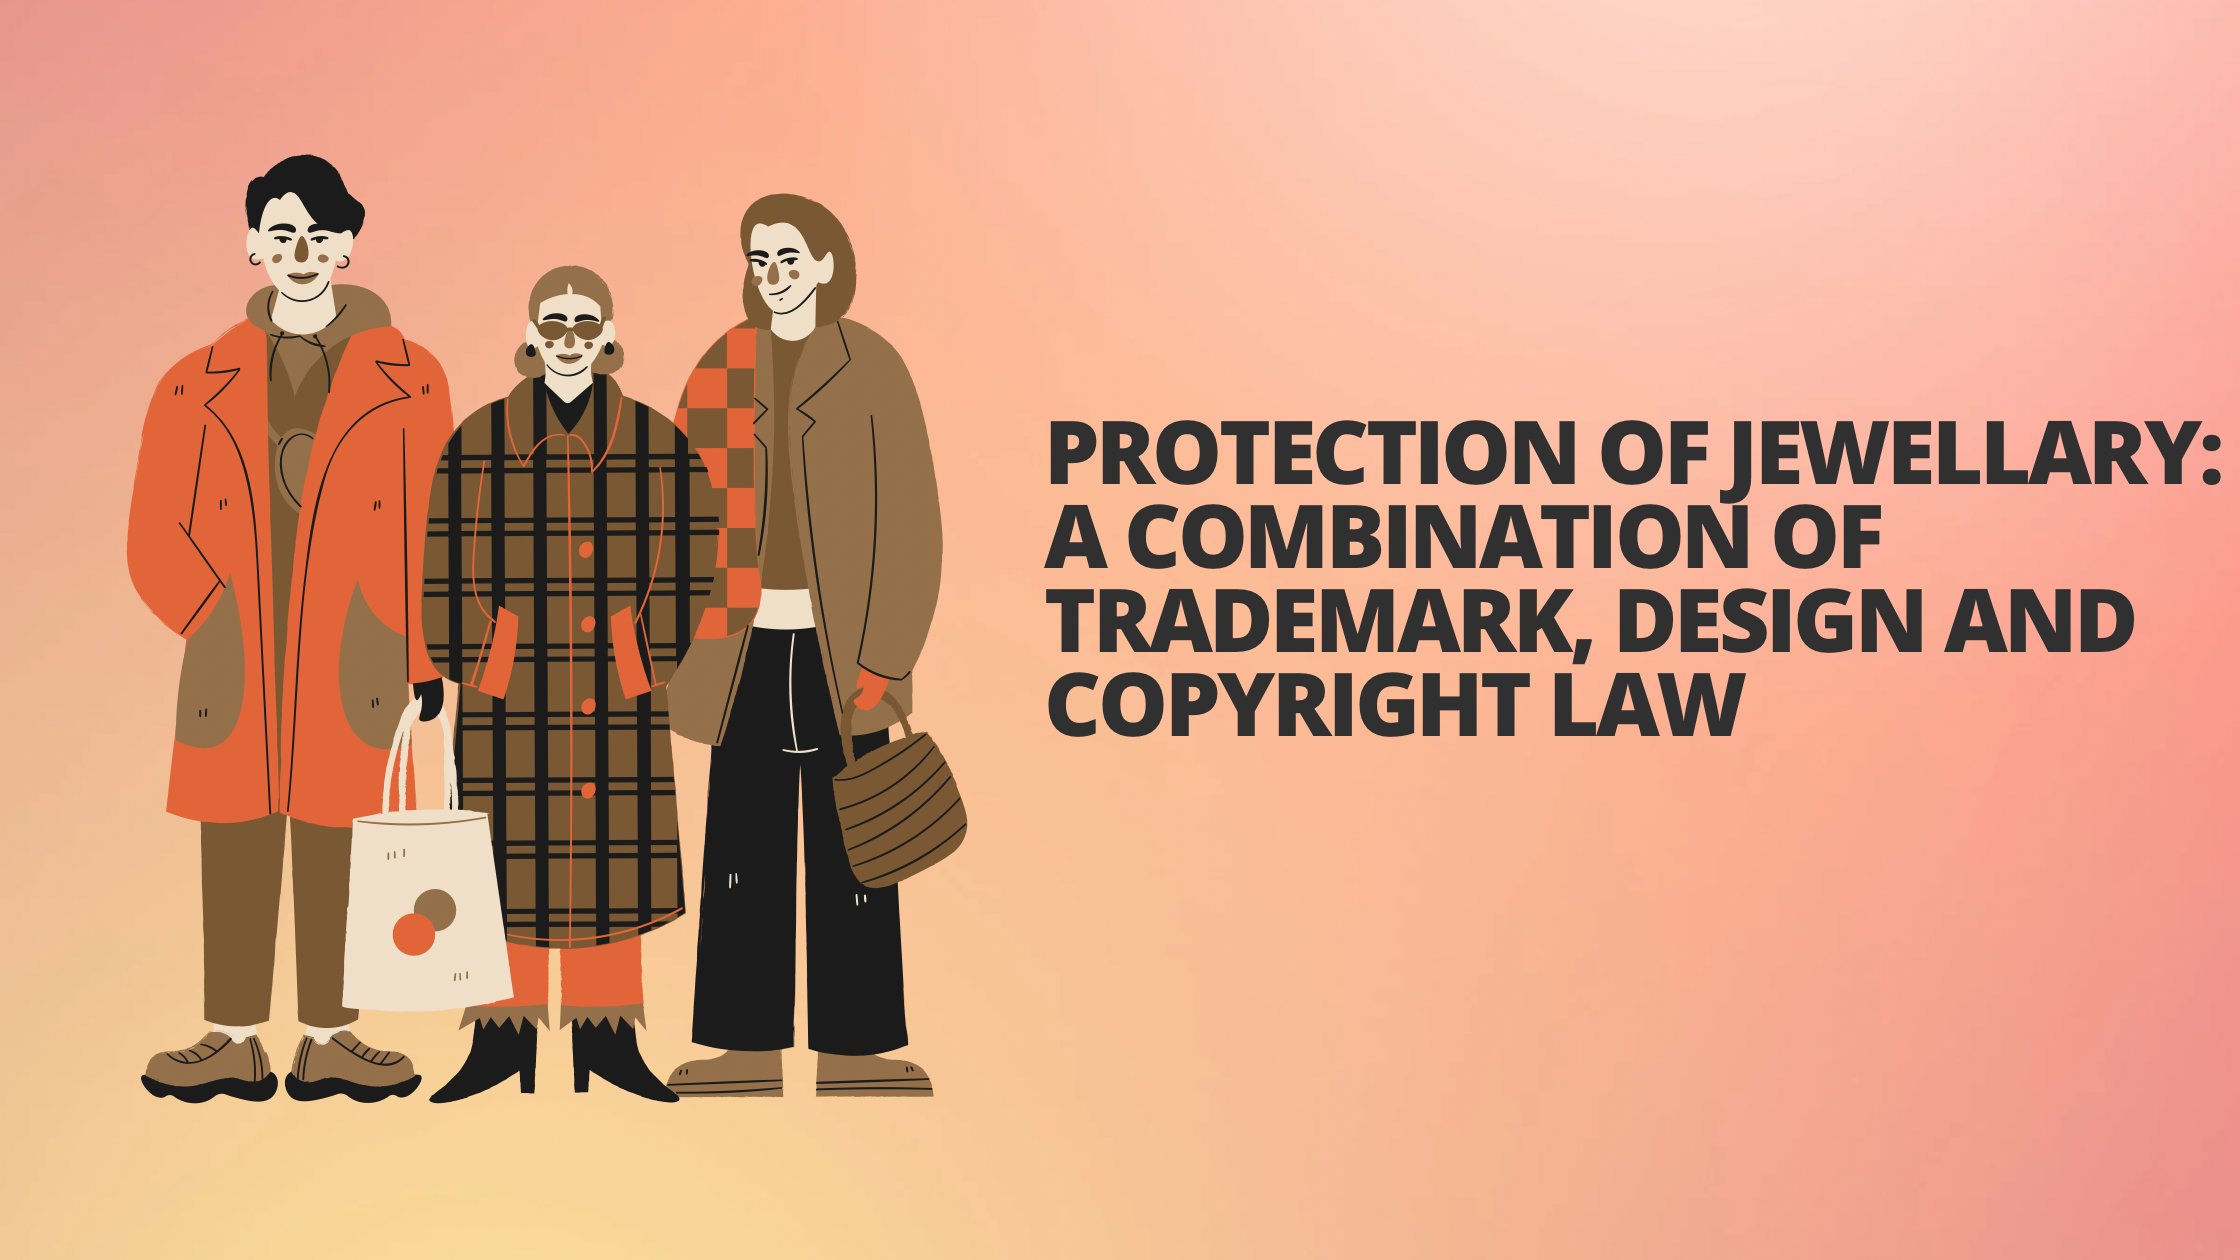 PROTECTION OF JEWELLARY: A COMBINATION OF TRADEMARK, DESIGN AND COPYRIGHT LAW.